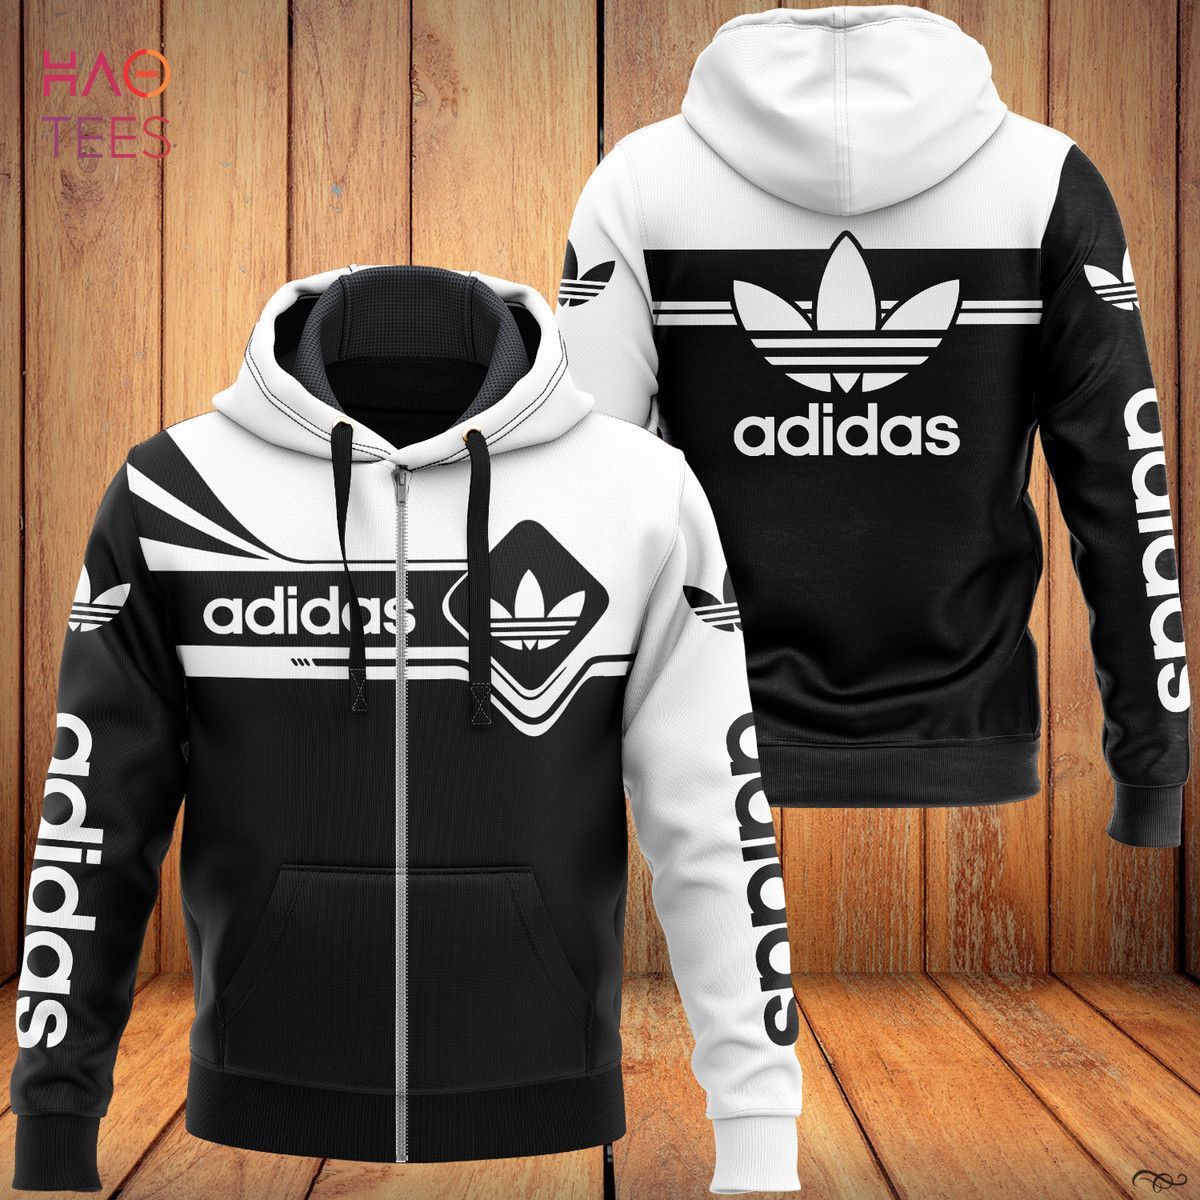 AVAILABLE Adidas Basic Color Black White Luxury Hoodie Limited Edition